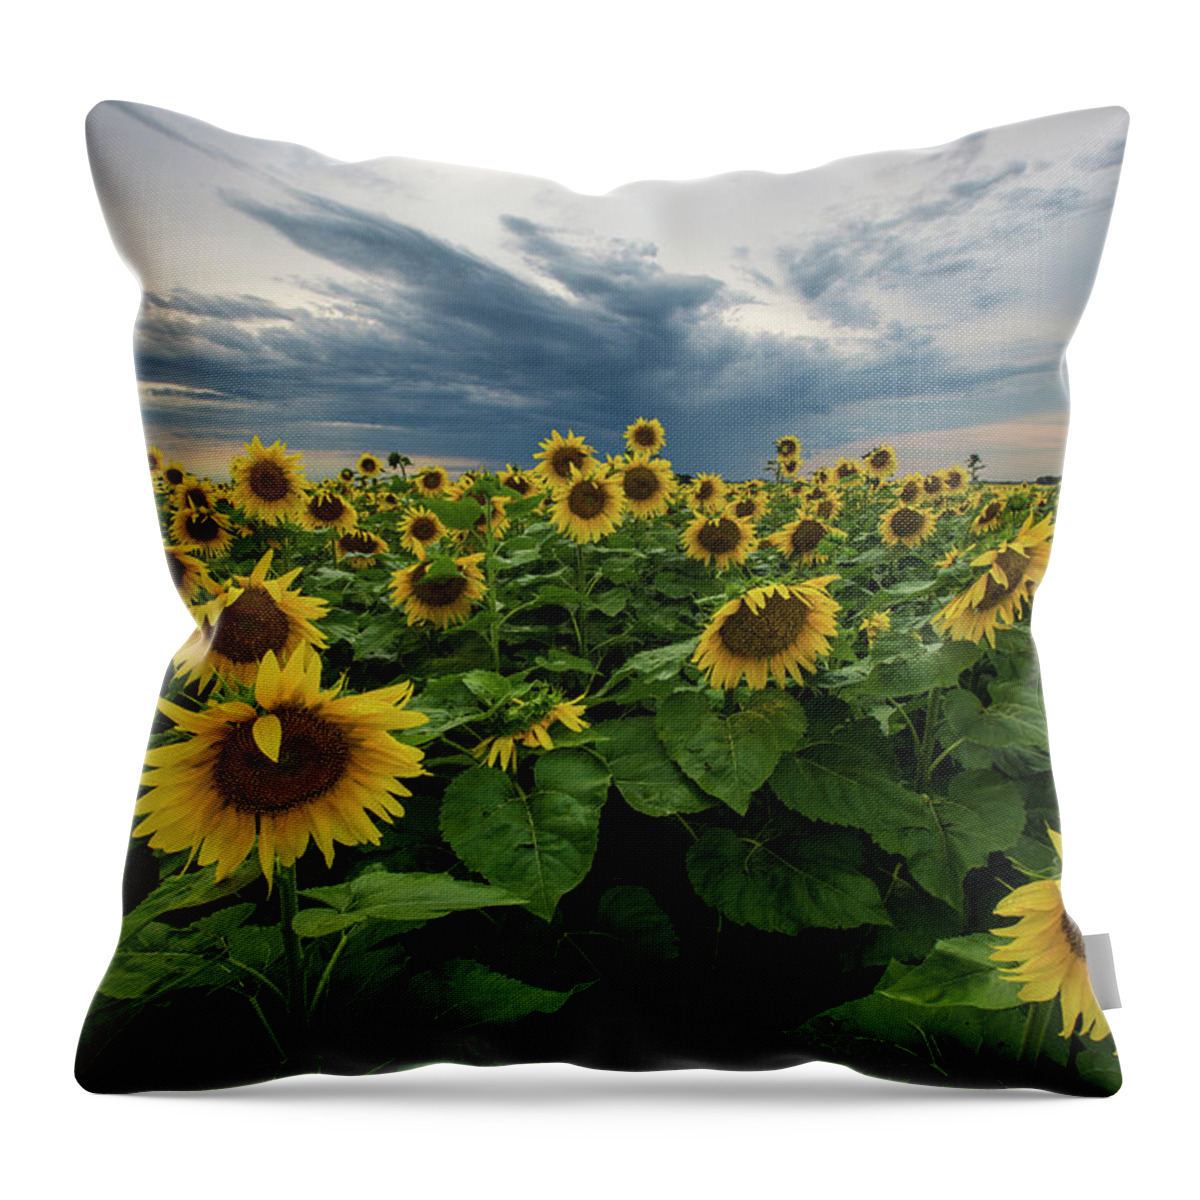 Storm Throw Pillow featuring the photograph Here Comes The Sun by Aaron J Groen